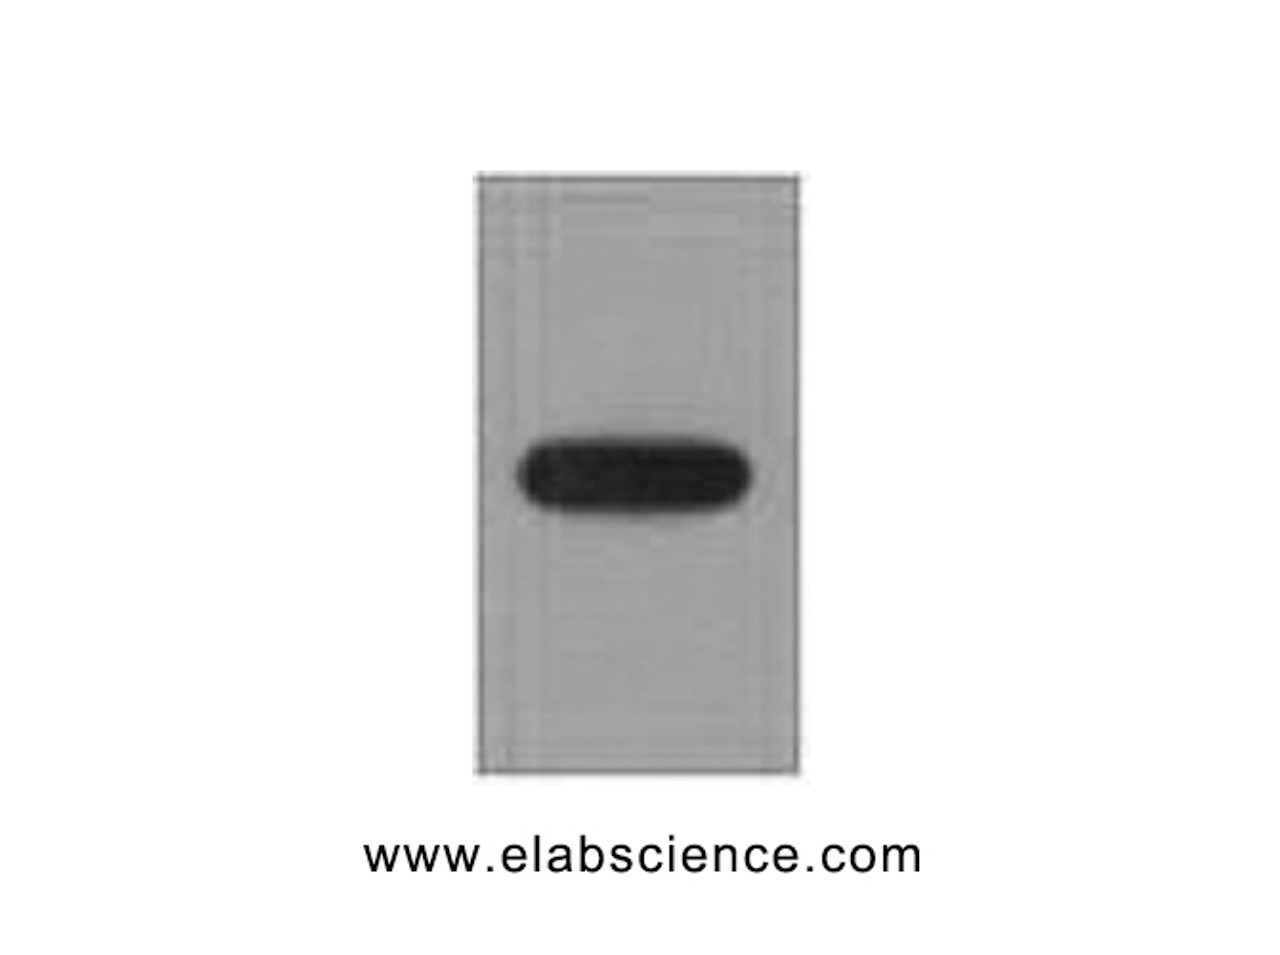 Western Blot analysis of recombinant EYFP protein using EYFP Monoclonal Antibody at dilution of 1:10000.